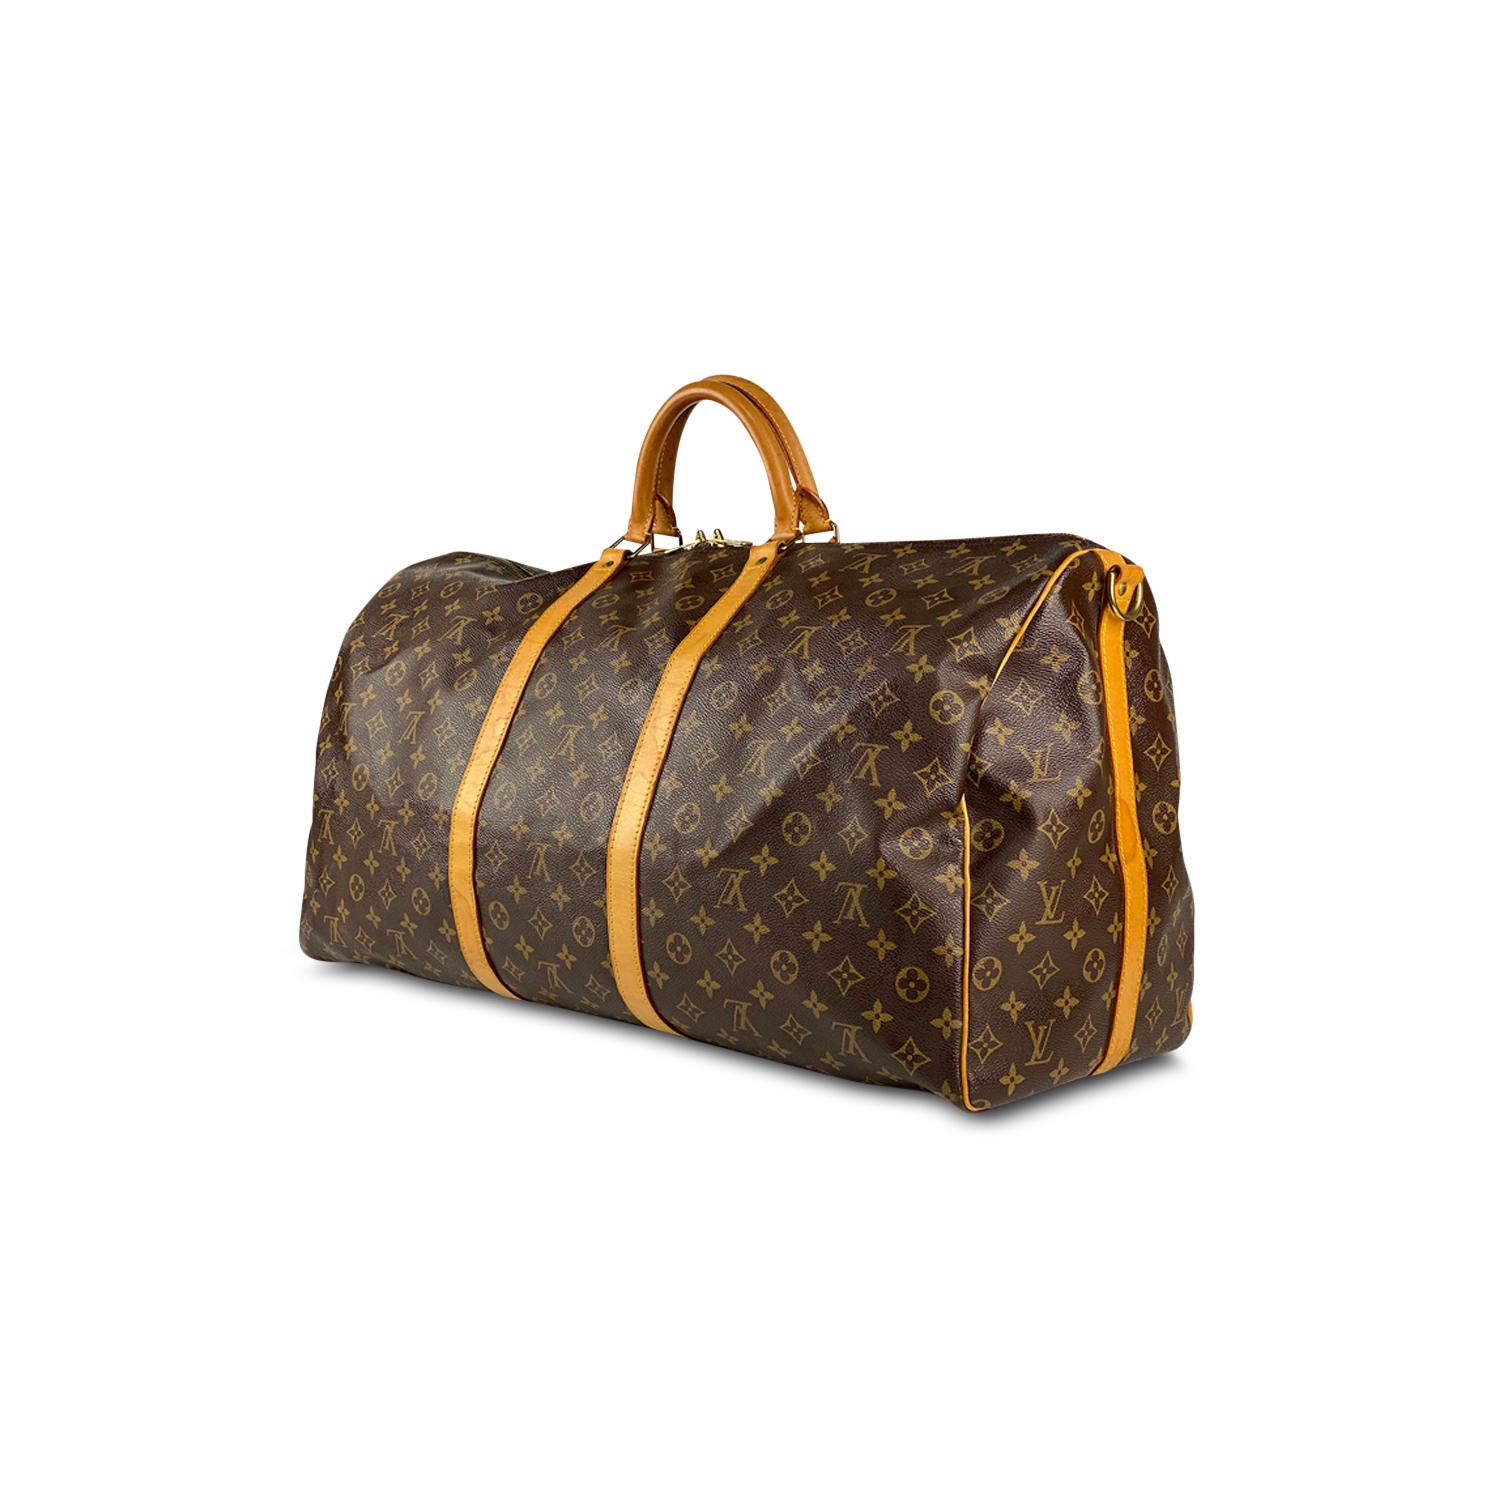 Louis Vuitton Monogram Keepall Bandoulière 60 In Good Condition For Sale In Sundbyberg, SE